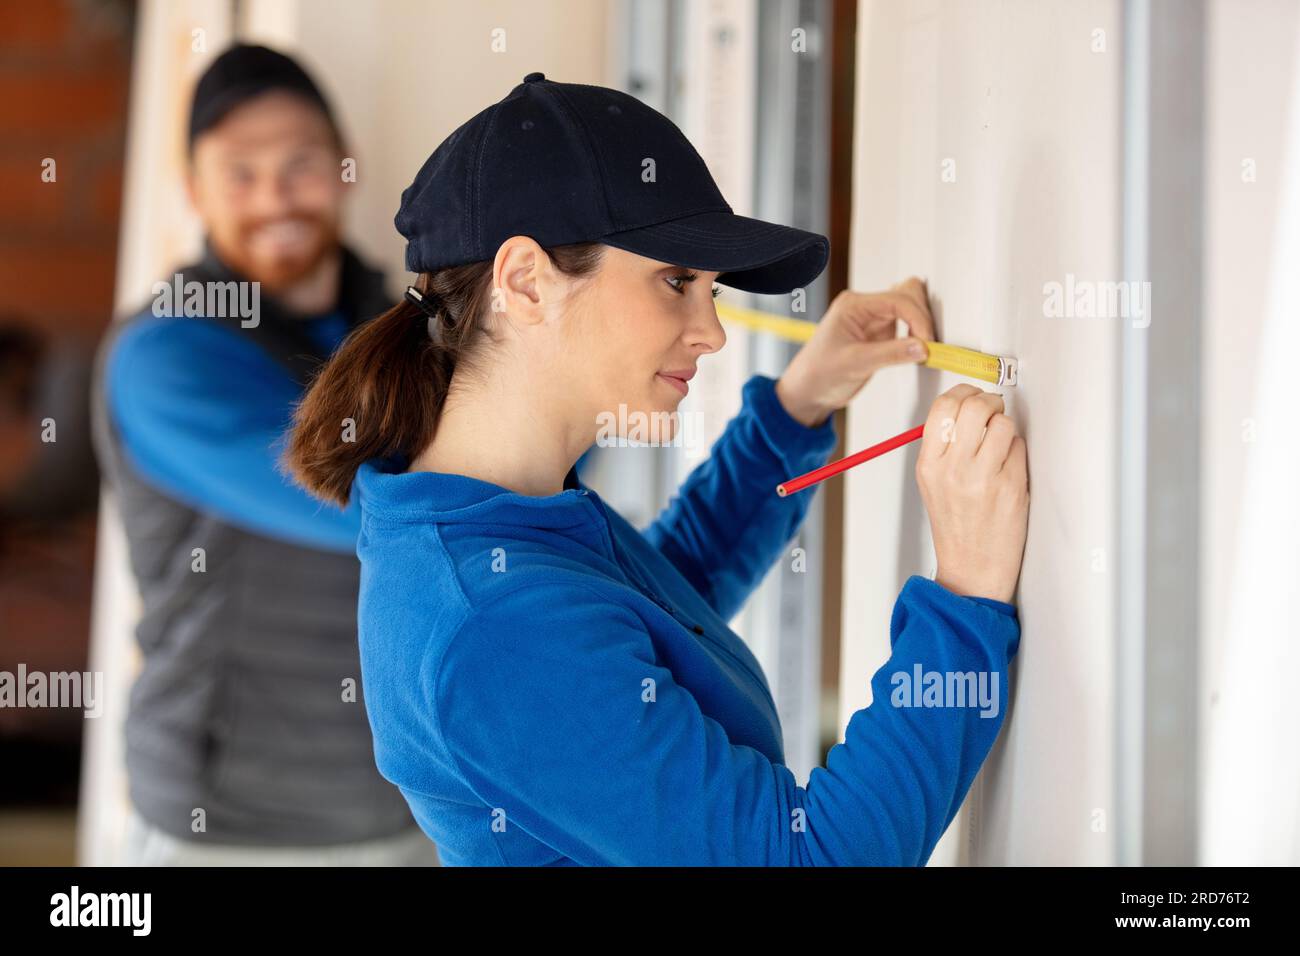 woman construction worker using measure tape and pencil Stock Photo